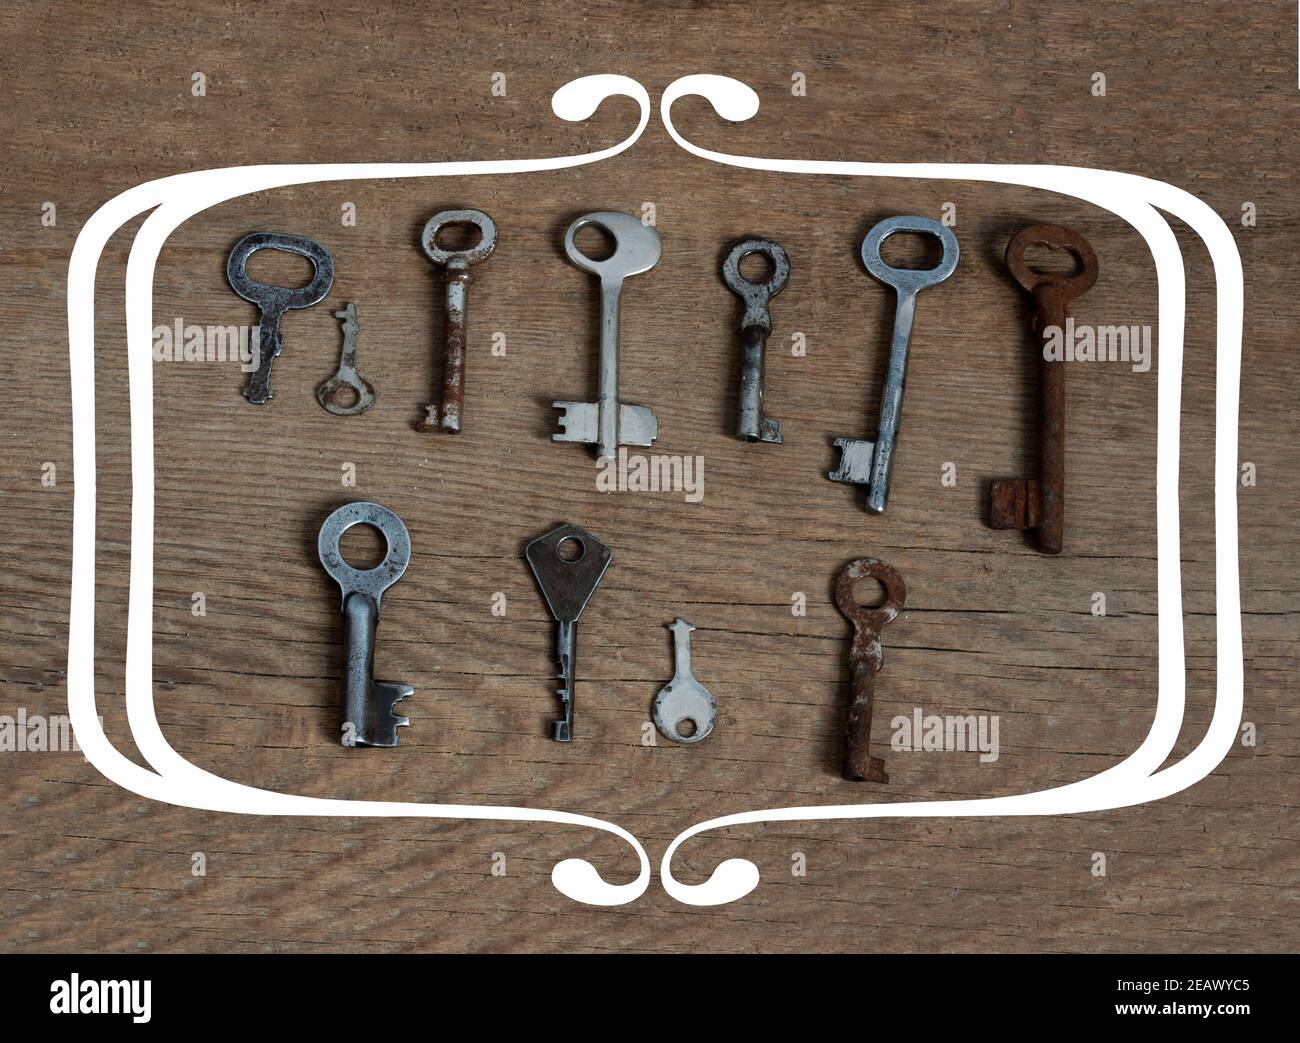 Old fashioned keys on wooden aged background with frame concept for text Stock Photo